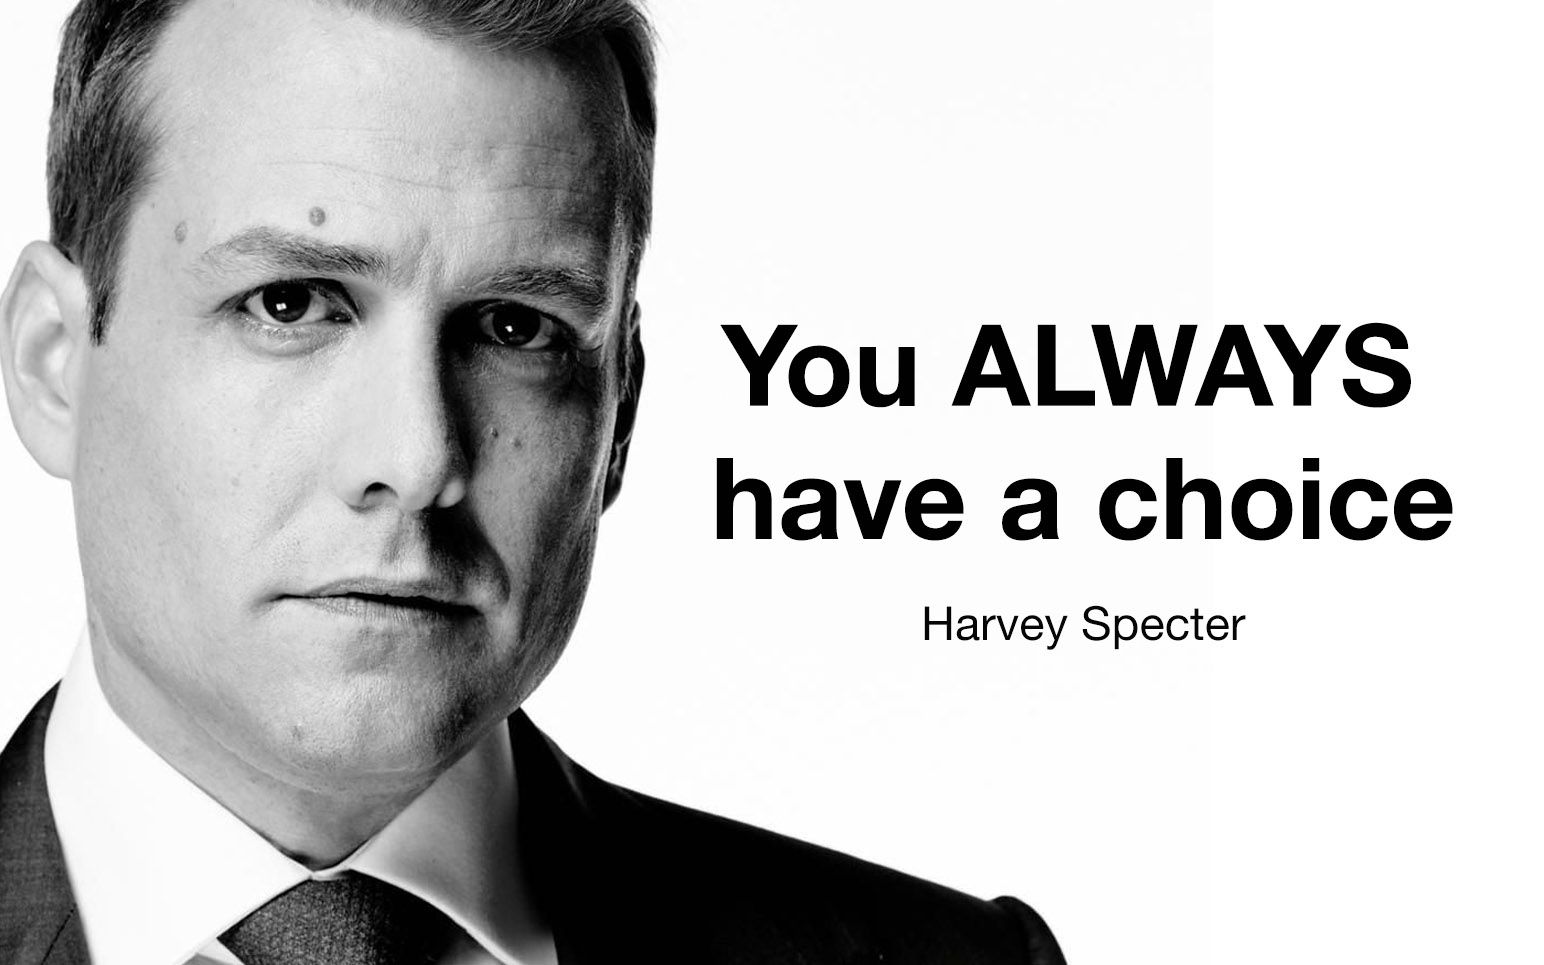 Harvey Specter quotes to help you win at life and entrepreneurship